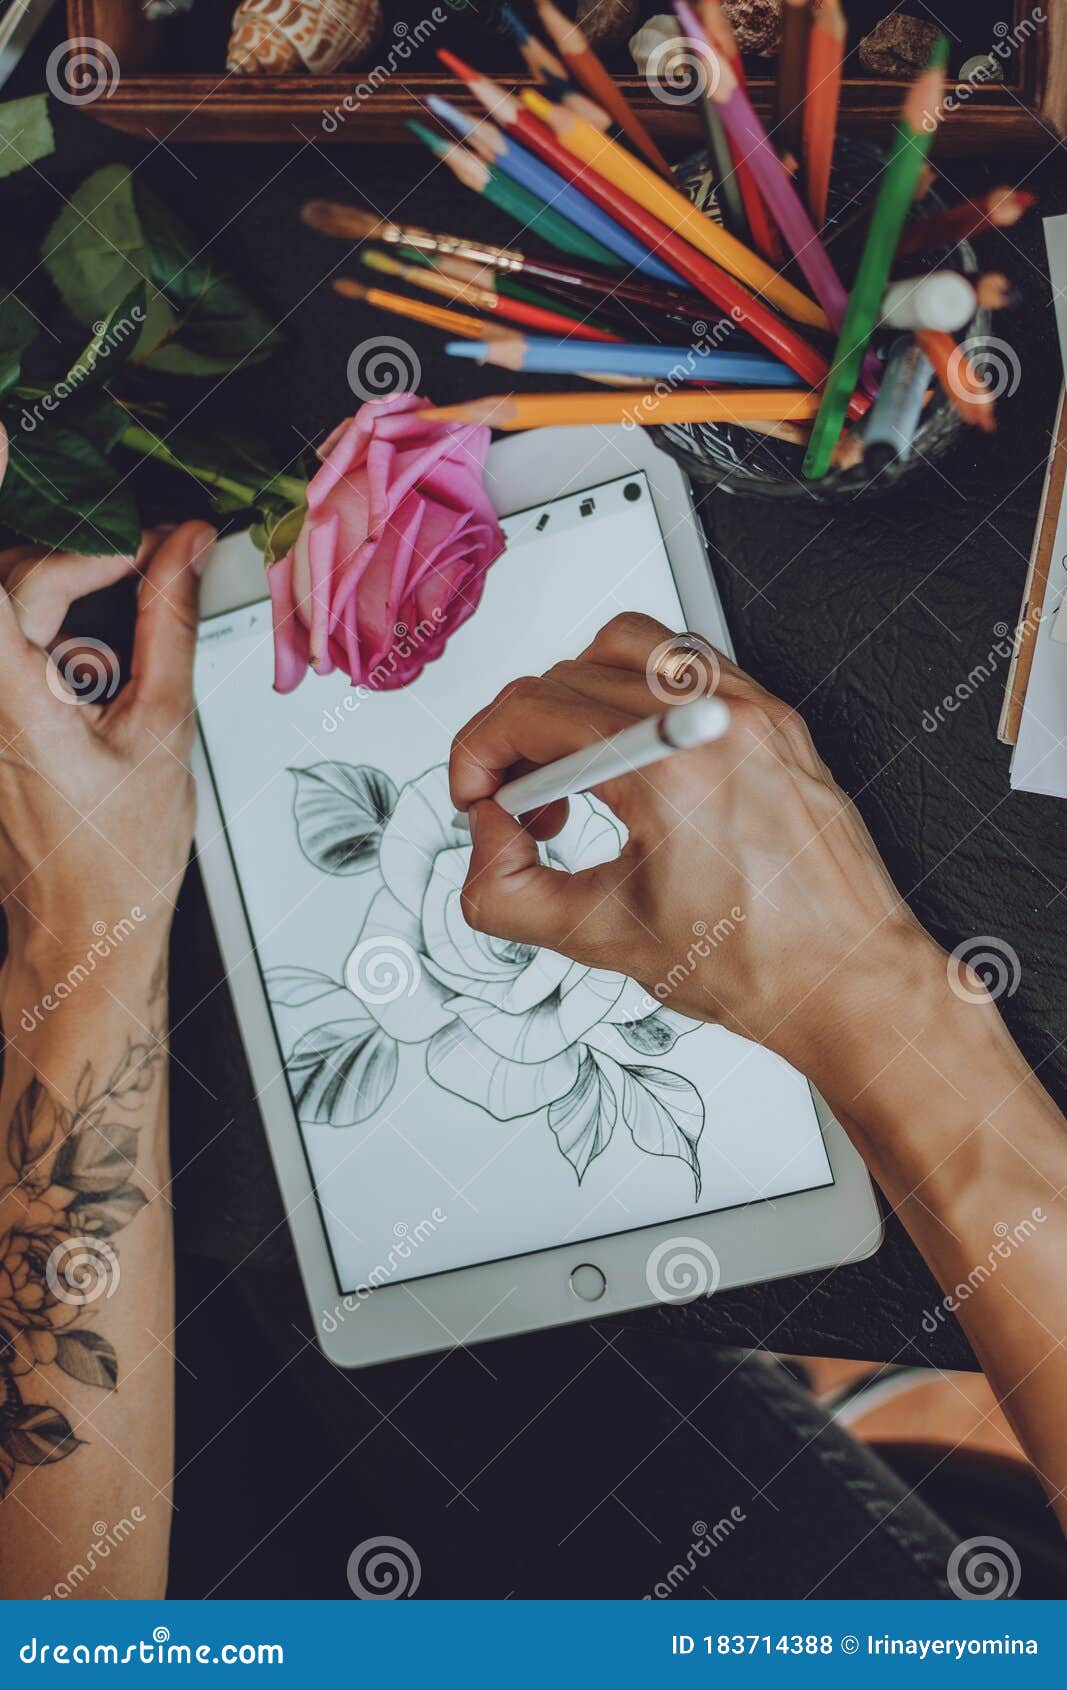 Tattoo Art Digital Process on Ipad. Tattoo Artist Hands Holding Apple Pencil and Drawing on IPad Pro in Procreate Editorial Stock Photo - Image of body, hipster: 183714388